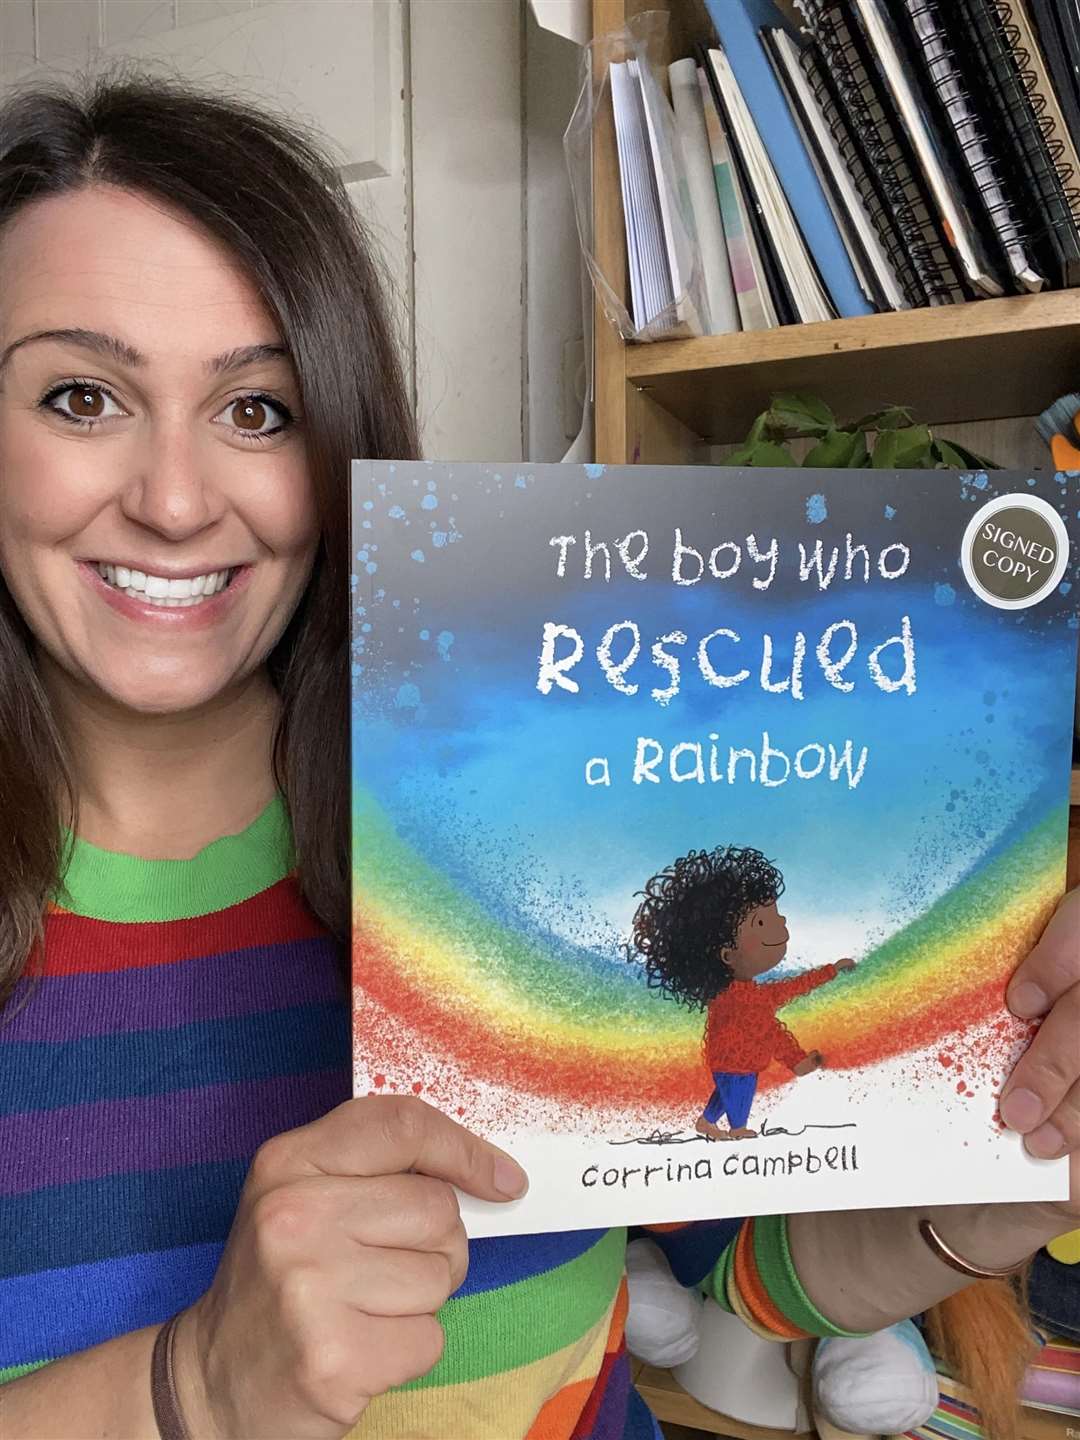 Corrina Campbell with her new book ‘The Boy who Rescued aRainbow’.